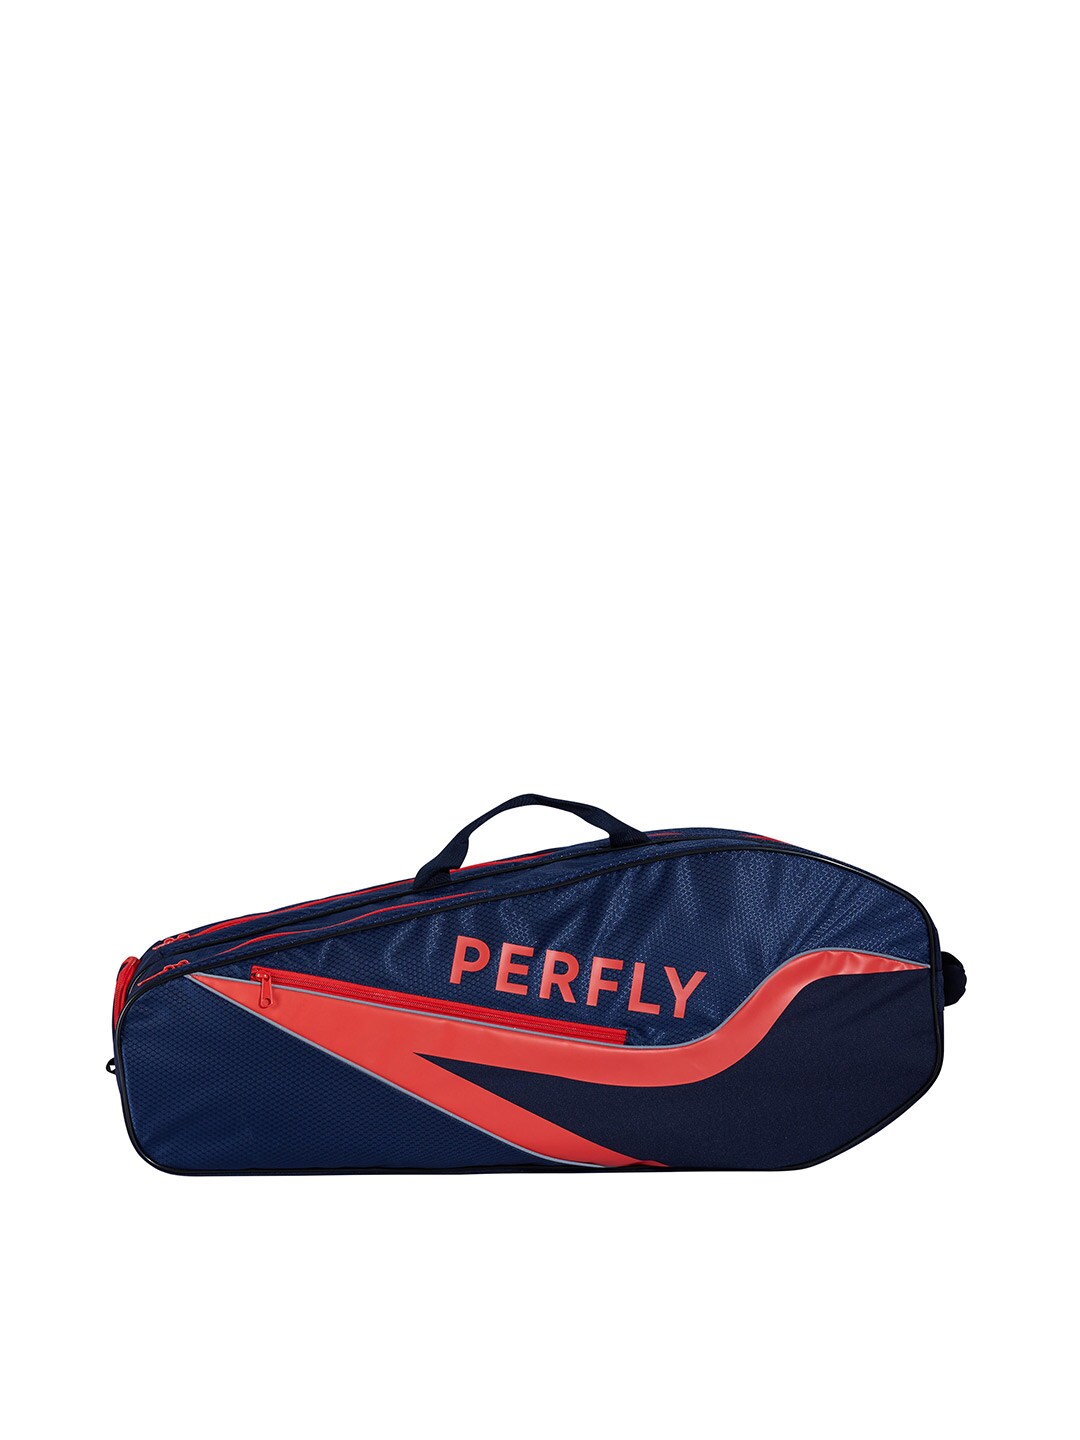 PERFLY By Decathlon Navy Blue & Red Printed Combat Sports Duffel Bag Price in India